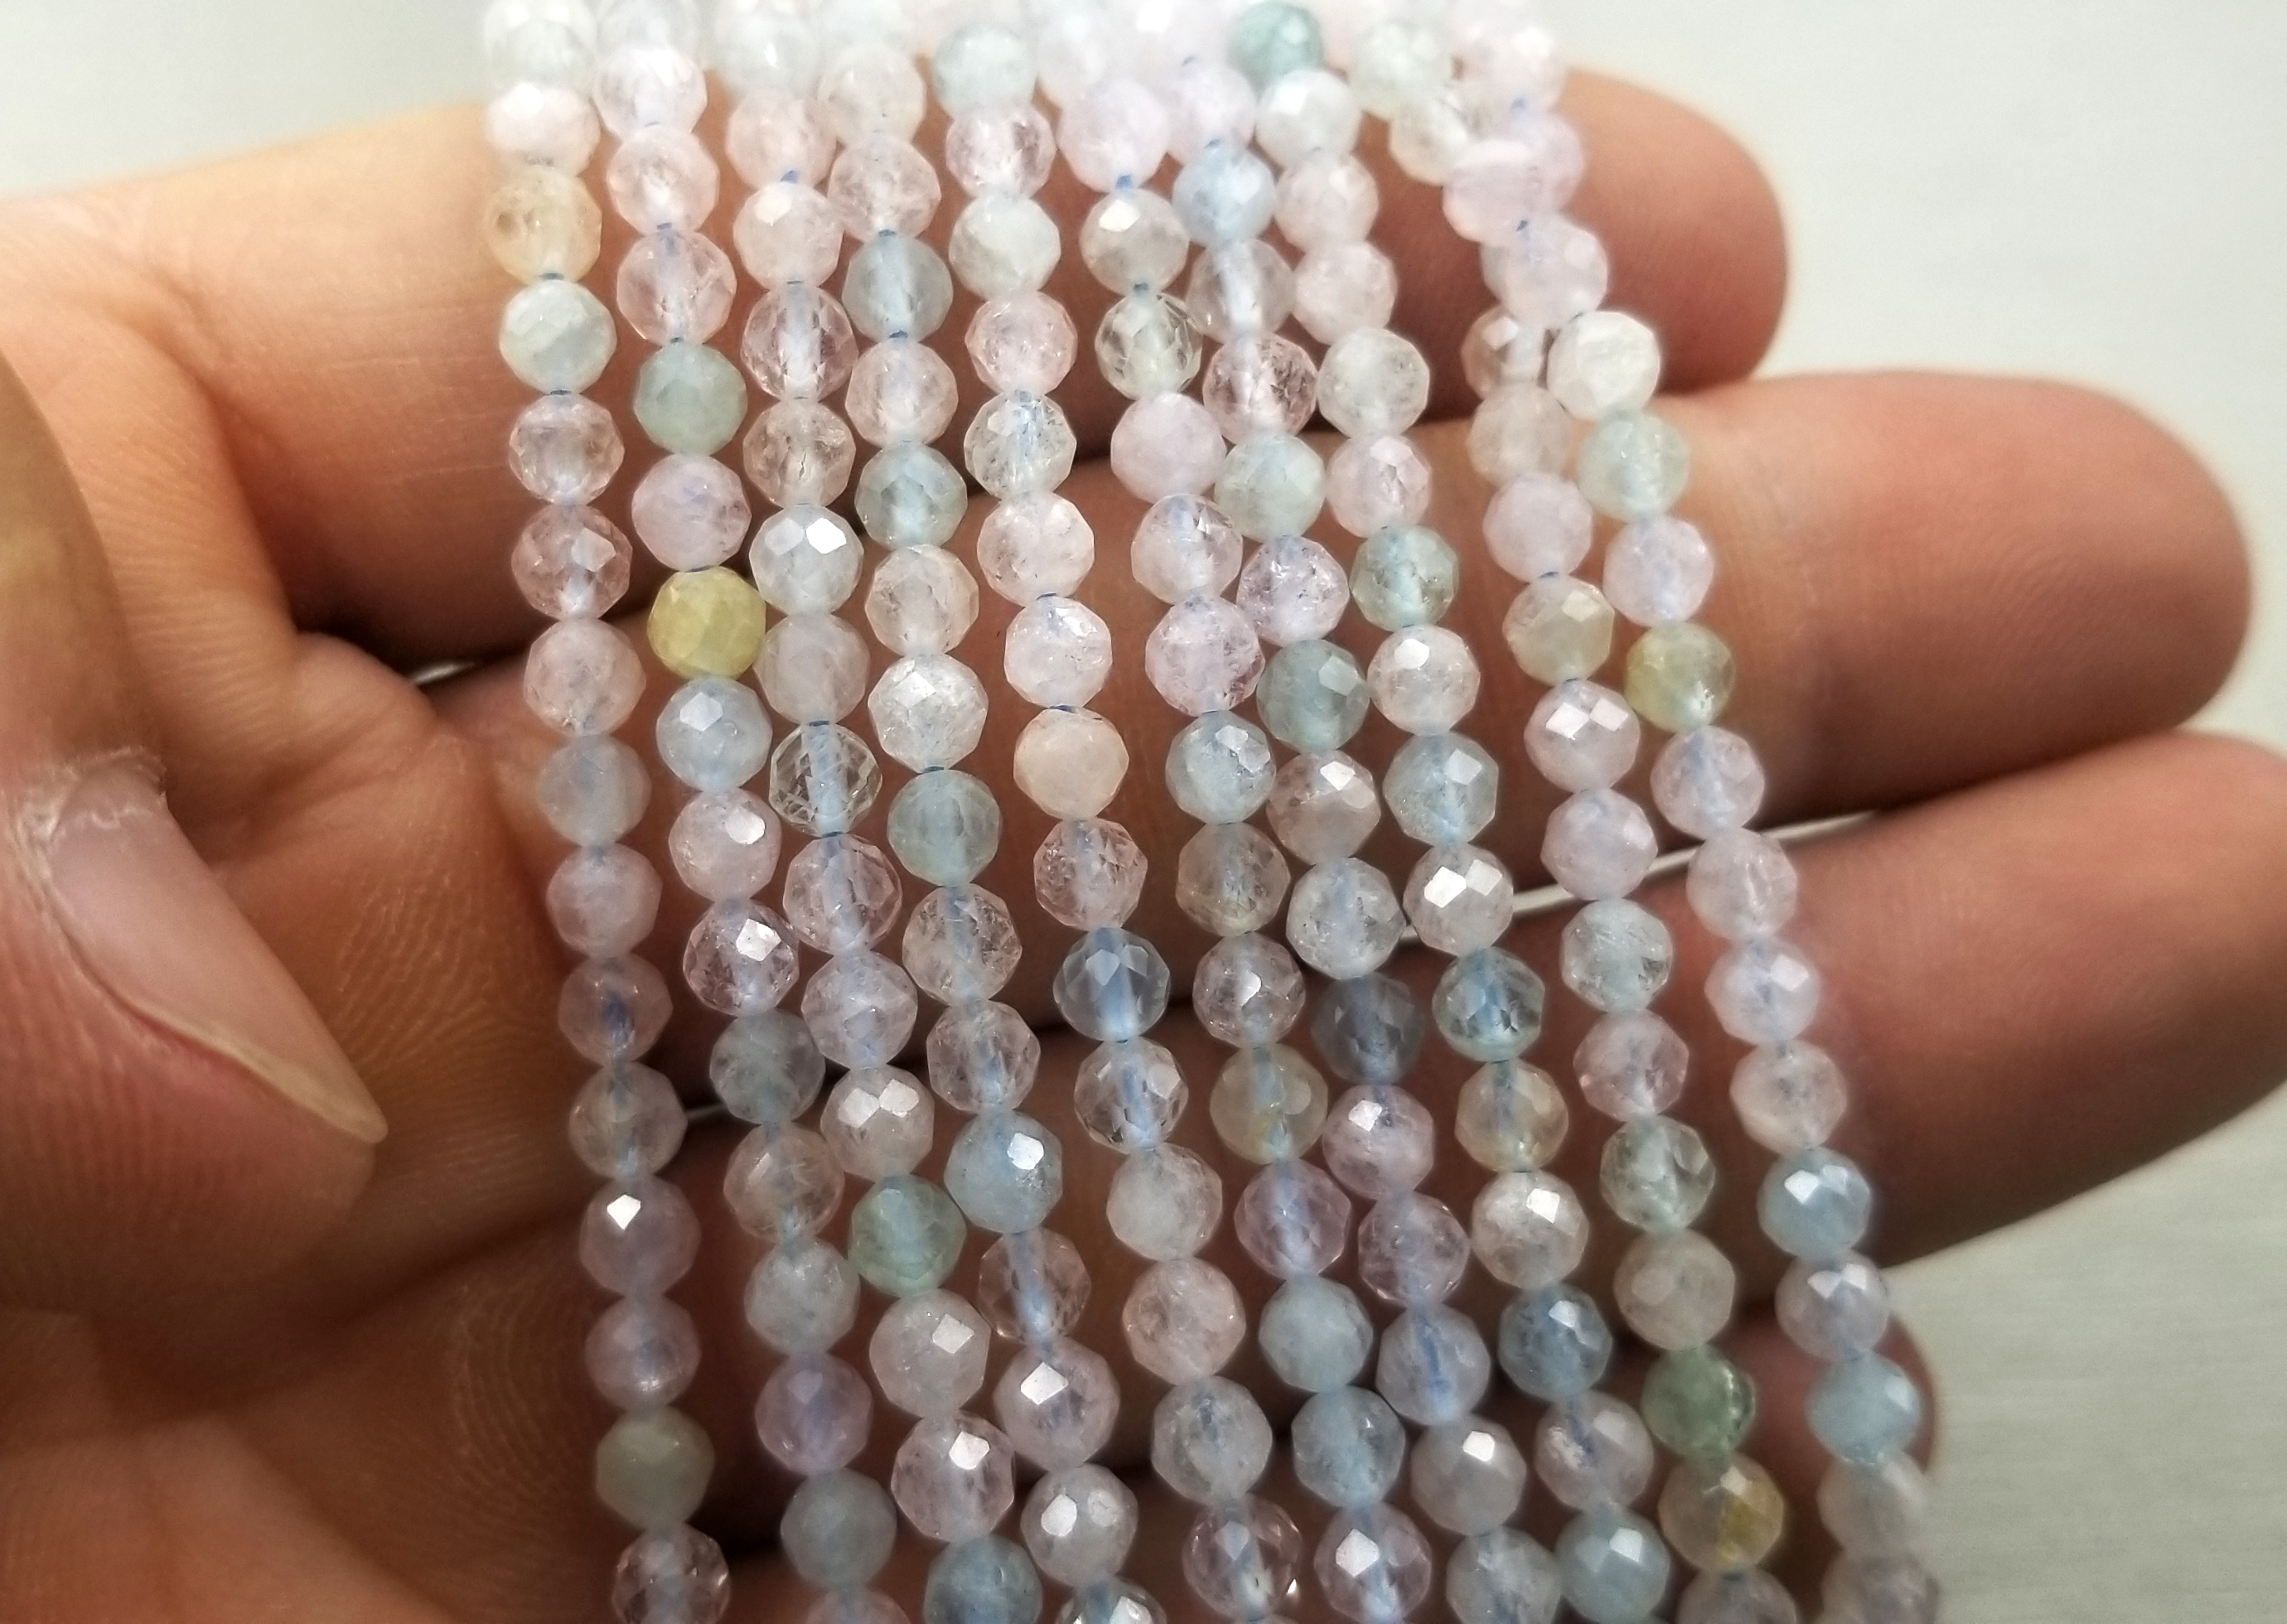 Natural Faceted BerylAquamarinePink MorganiteHeliodor Beads  AAA Quality 4MM Size available,Smooth Beads Jewelry Making,Polished Beads